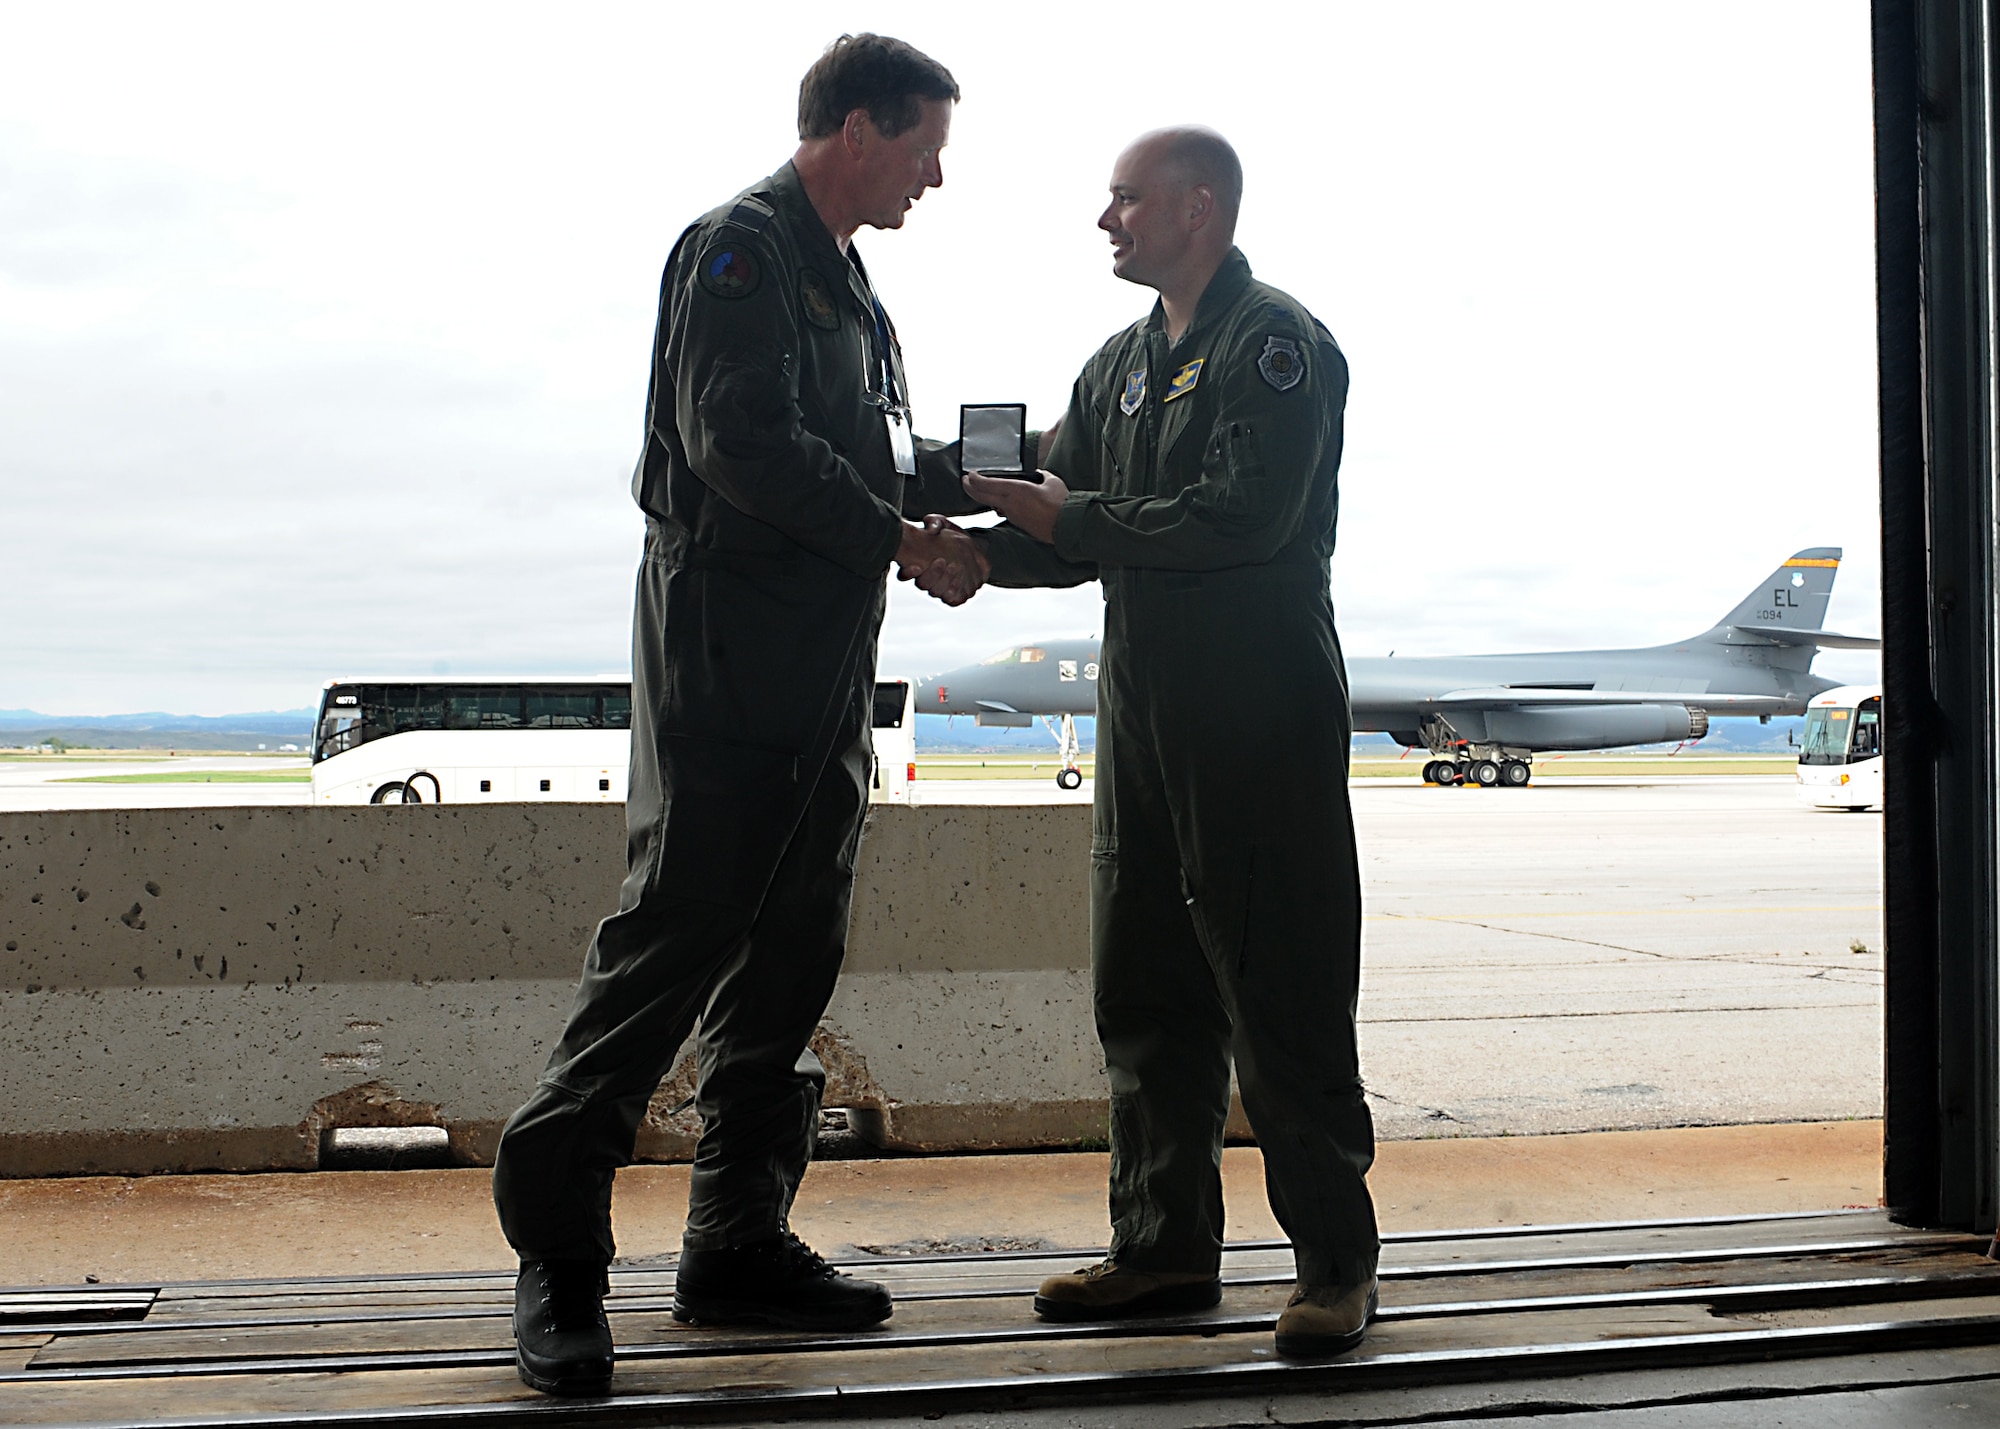 Col. Bradley Cochran, vice commander assigned to the 28th Bomb Wing, presents a token of appreciation to Air Commodore Theodorus ten Haaf, the defense attaché representing the Netherlands, during a presentation of B-1 bomber capabilities at Ellsworth Air Force Base, S.D., Sept. 12, 2016. The event concluded a visit by military attachés from throughout the world who stopped at Ellsworth as the first location in a multi-state tour. (U.S. Air Force photo by Airman 1st Class Marshall L. Brown)